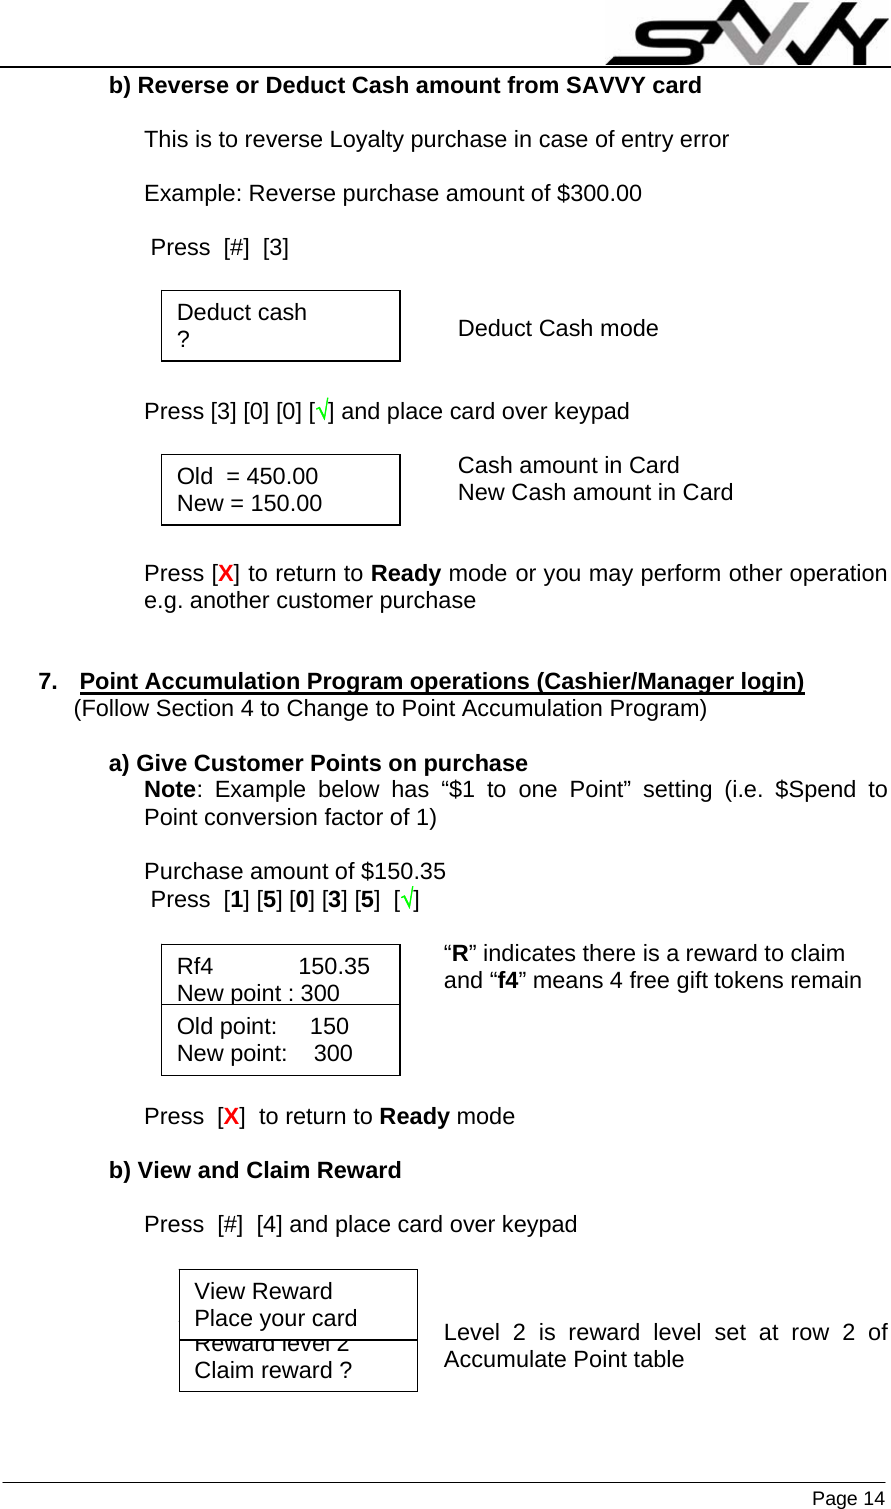                    Page 14  b) Reverse or Deduct Cash amount from SAVVY card  This is to reverse Loyalty purchase in case of entry error  Example: Reverse purchase amount of $300.00   Press  [#]  [3]                                                   Deduct Cash mode   Press [3] [0] [0] [√] and place card over keypad                                                  Cash amount in Card                                                 New Cash amount in Card       Press [X] to return to Ready mode or you may perform other operation e.g. another customer purchase   7.  Point Accumulation Program operations (Cashier/Manager login) (Follow Section 4 to Change to Point Accumulation Program)  a) Give Customer Points on purchase Note: Example below has “$1 to one Point” setting (i.e. $Spend to Point conversion factor of 1)  Purchase amount of $150.35  Press  [1] [5] [0] [3] [5]  [√]  “R” indicates there is a reward to claim and “f4” means 4 free gift tokens remain     Press  [X]  to return to Ready mode  b) View and Claim Reward  Press  [#]  [4] and place card over keypad    Level 2 is reward level set at row 2 of Accumulate Point table    Old  = 450.00 New = 150.00 Deduct cash ? Rf4             150.35 New point : 300 Old point:     150 New point:    300 Reward level 2 Claim reward ? View Reward Place your card 